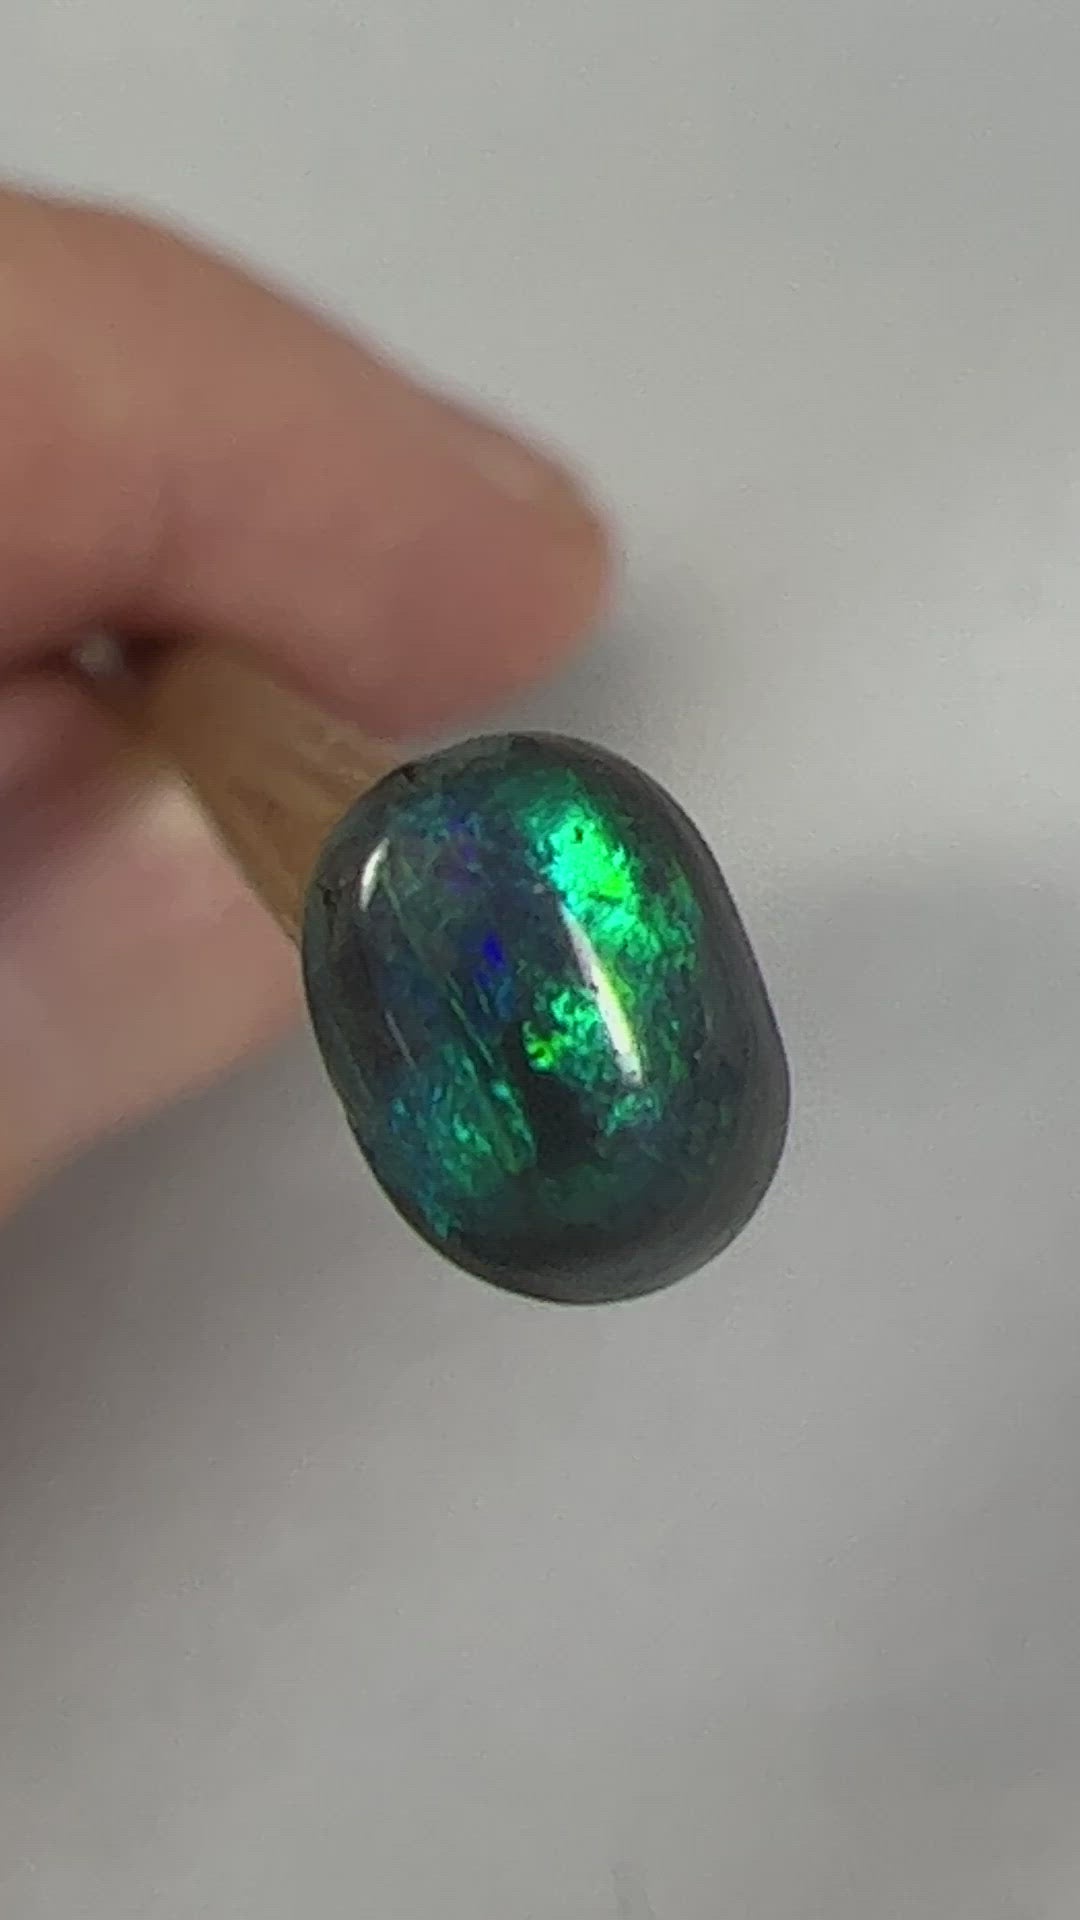 Nice little solid black opal from Lightning Ridge, displaying beautiful greens. Would make a great ring stone.